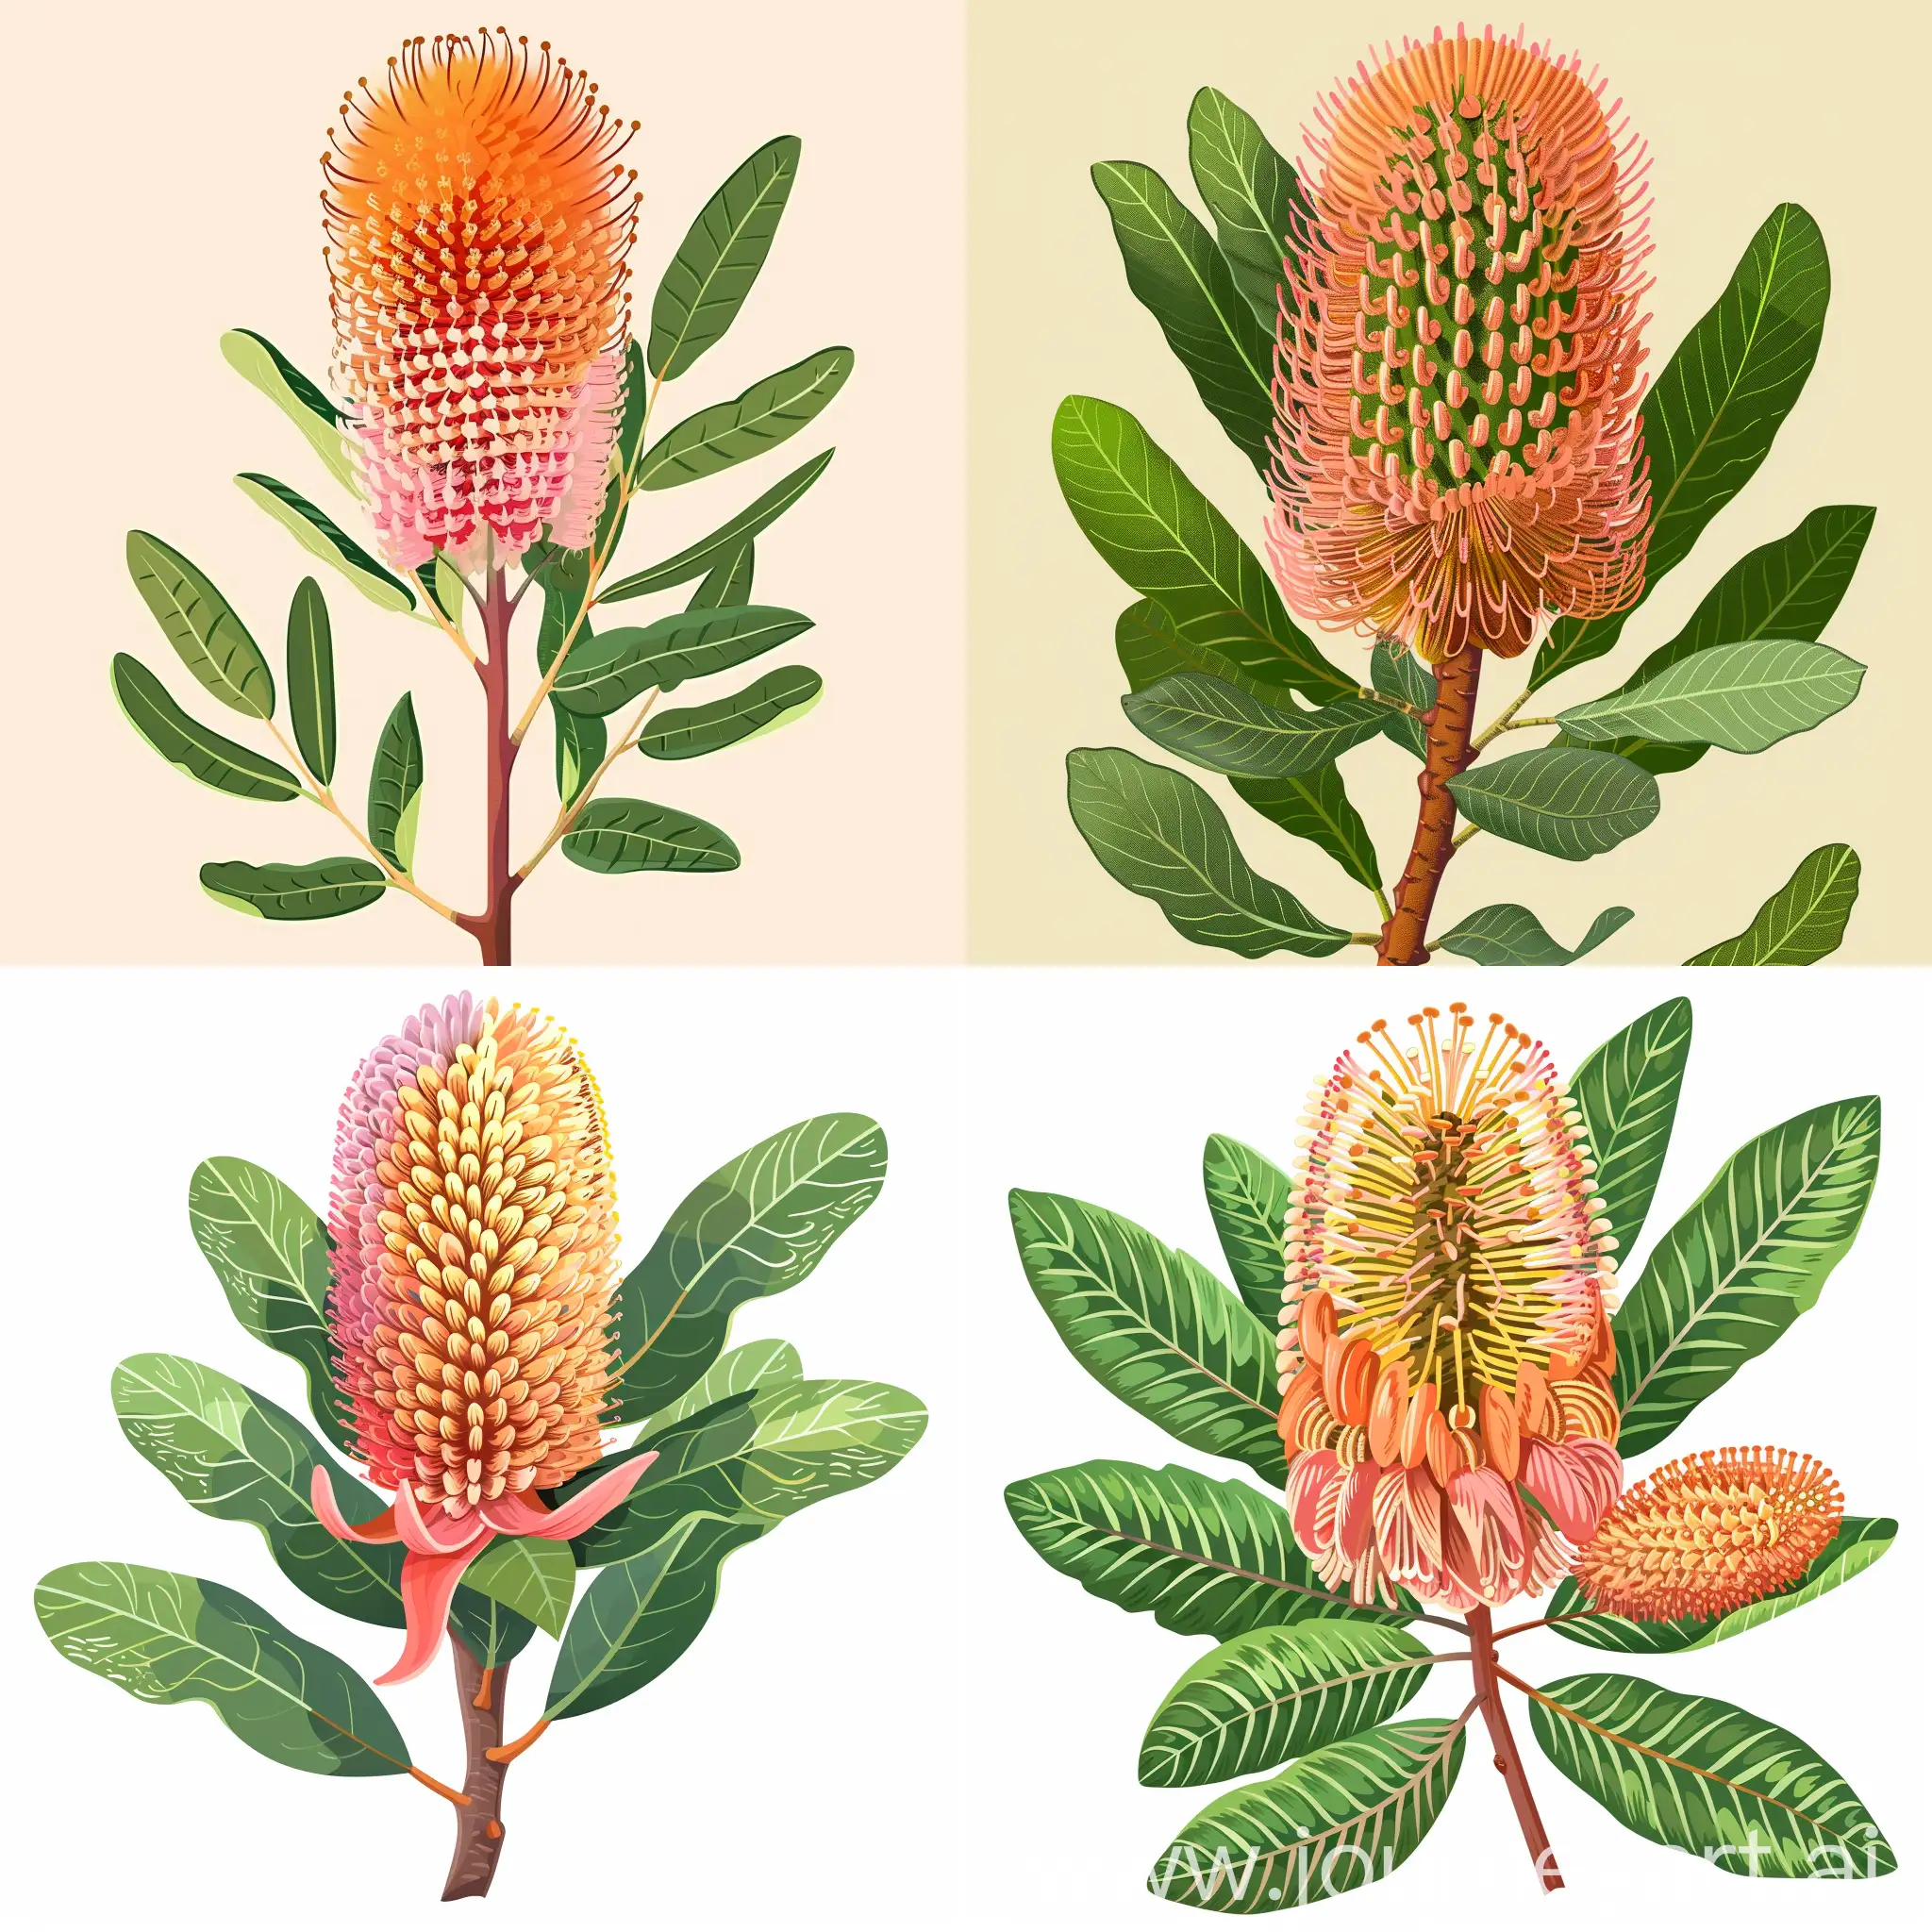 Vibrant-Australian-Banksia-Flower-Cartoon-with-Orange-and-Pink-Shades-on-Green-Leaves